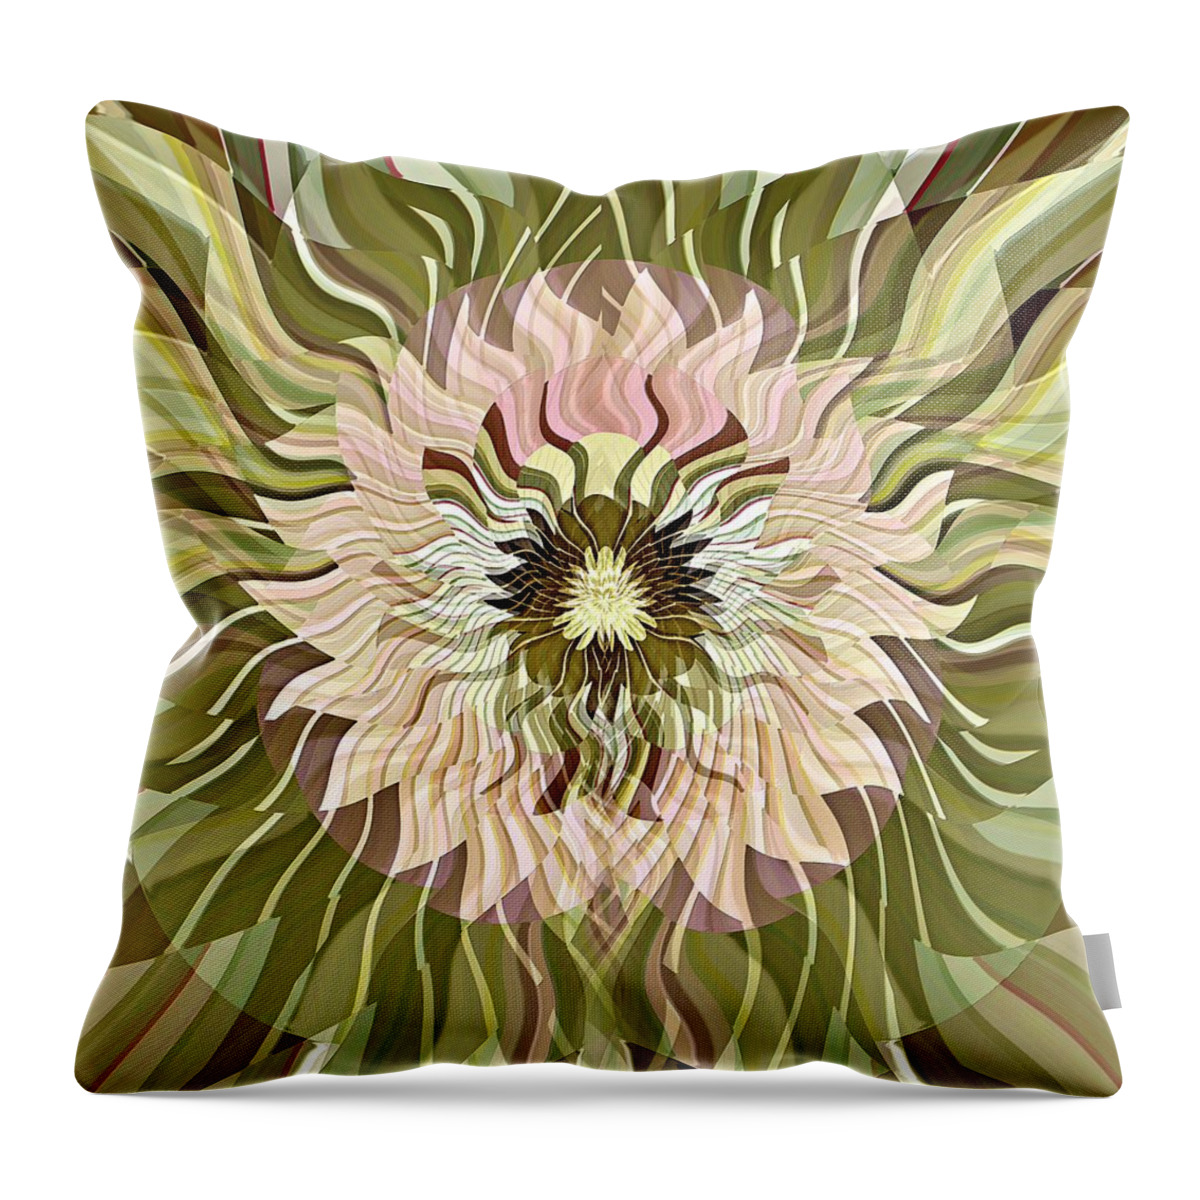 Pale Throw Pillow featuring the digital art Pale Pink Floral by David Manlove